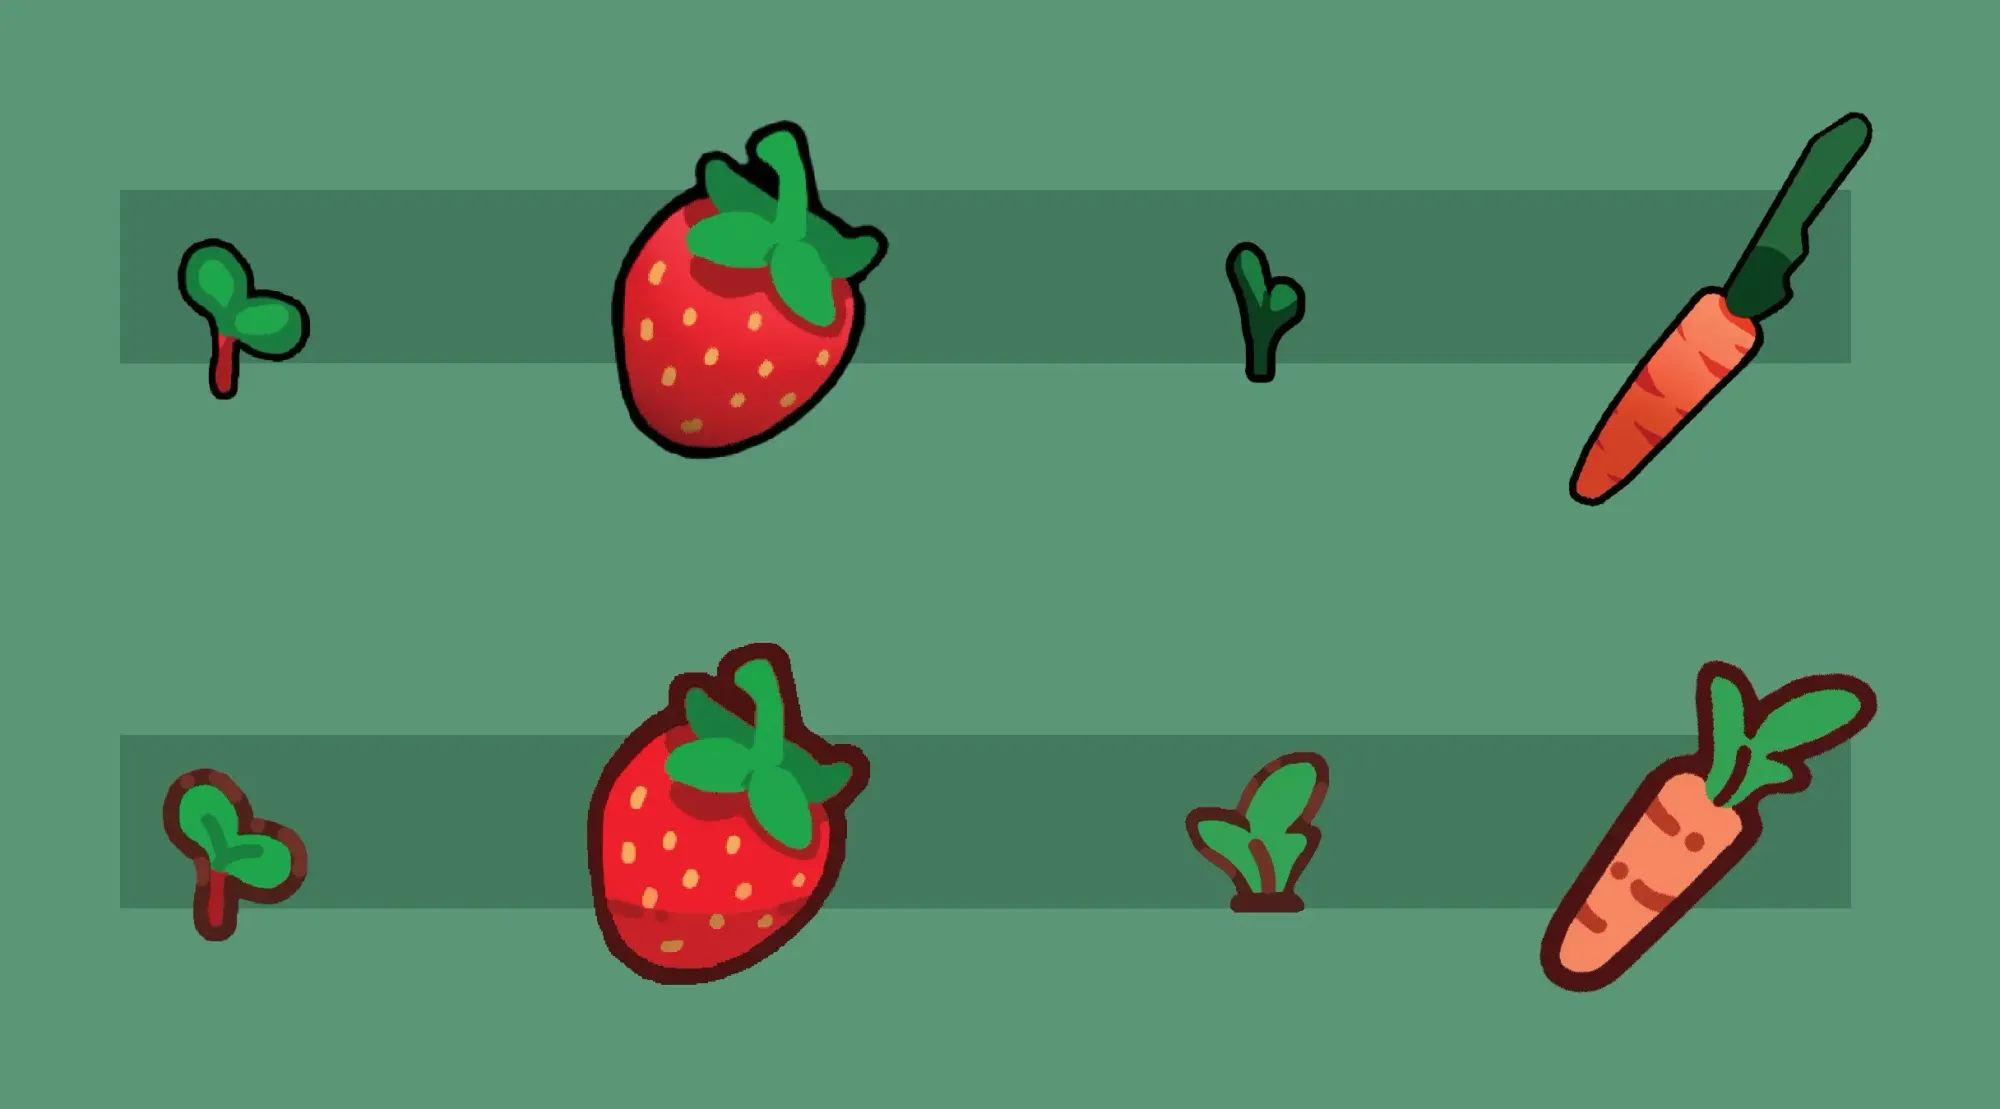 A visual representation of the new style of crops in the game compared to the old style.